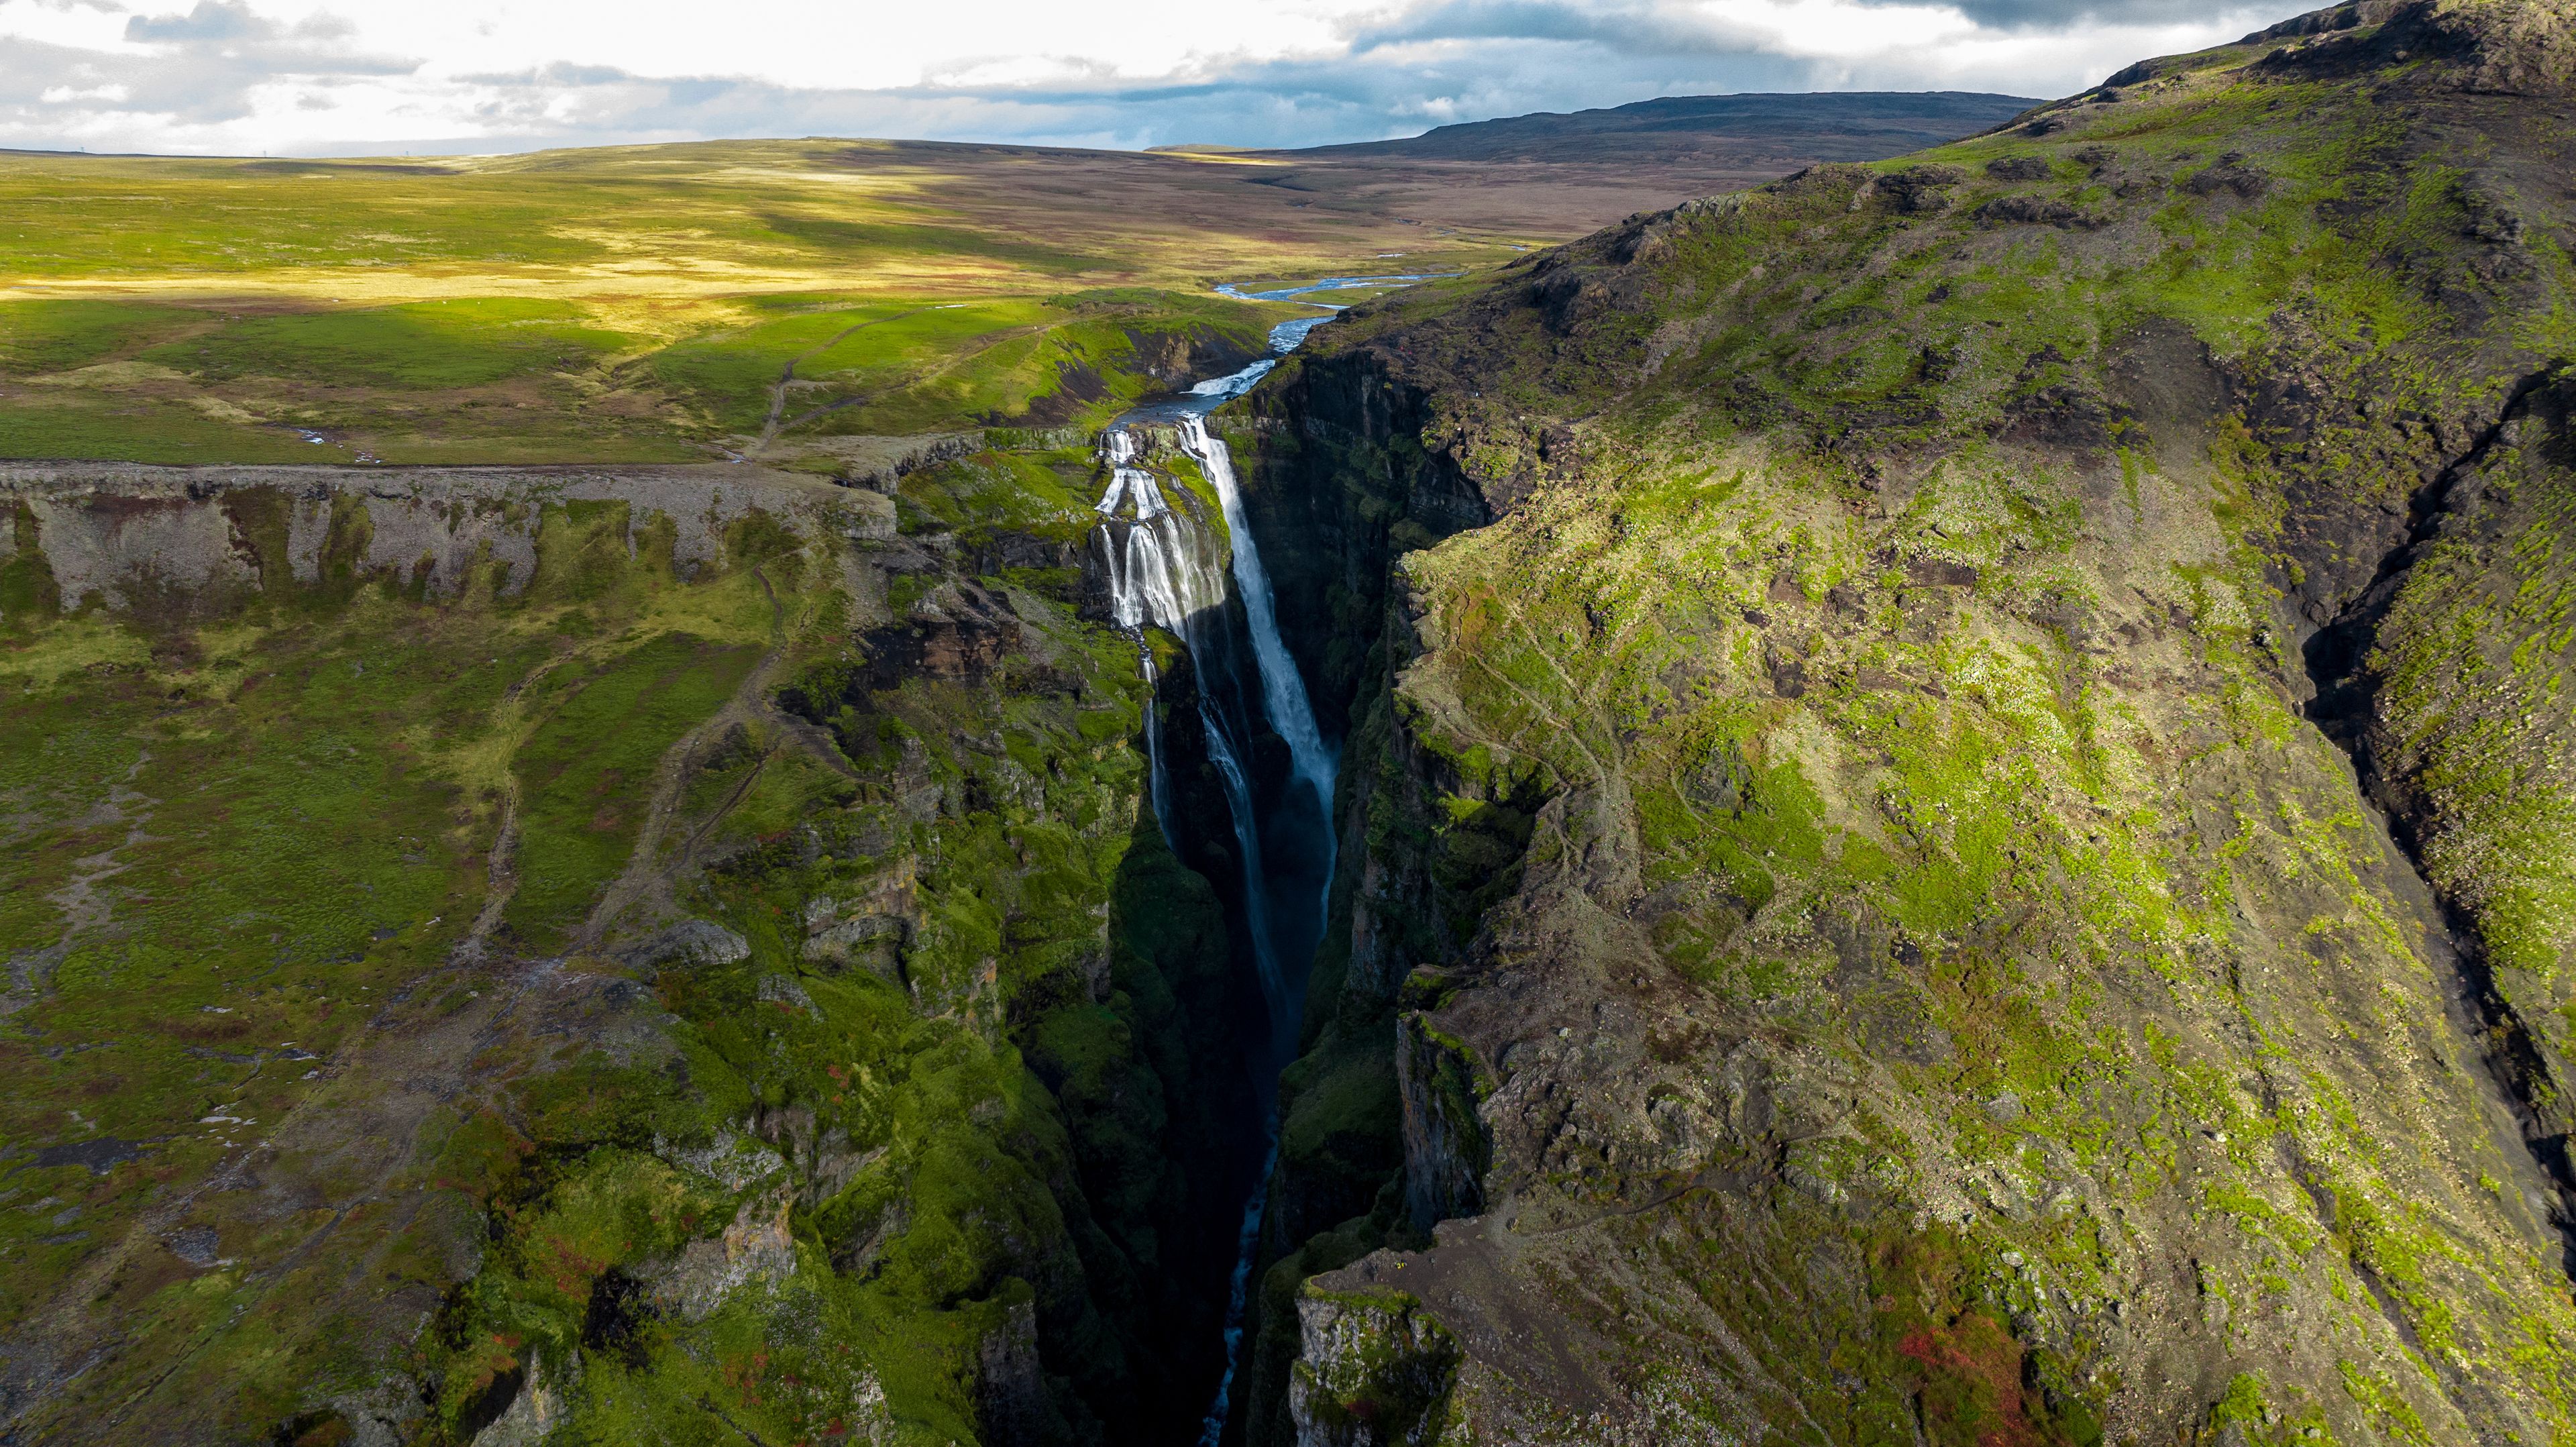 Aerial view of Glymur Canyon with its towering waterfall